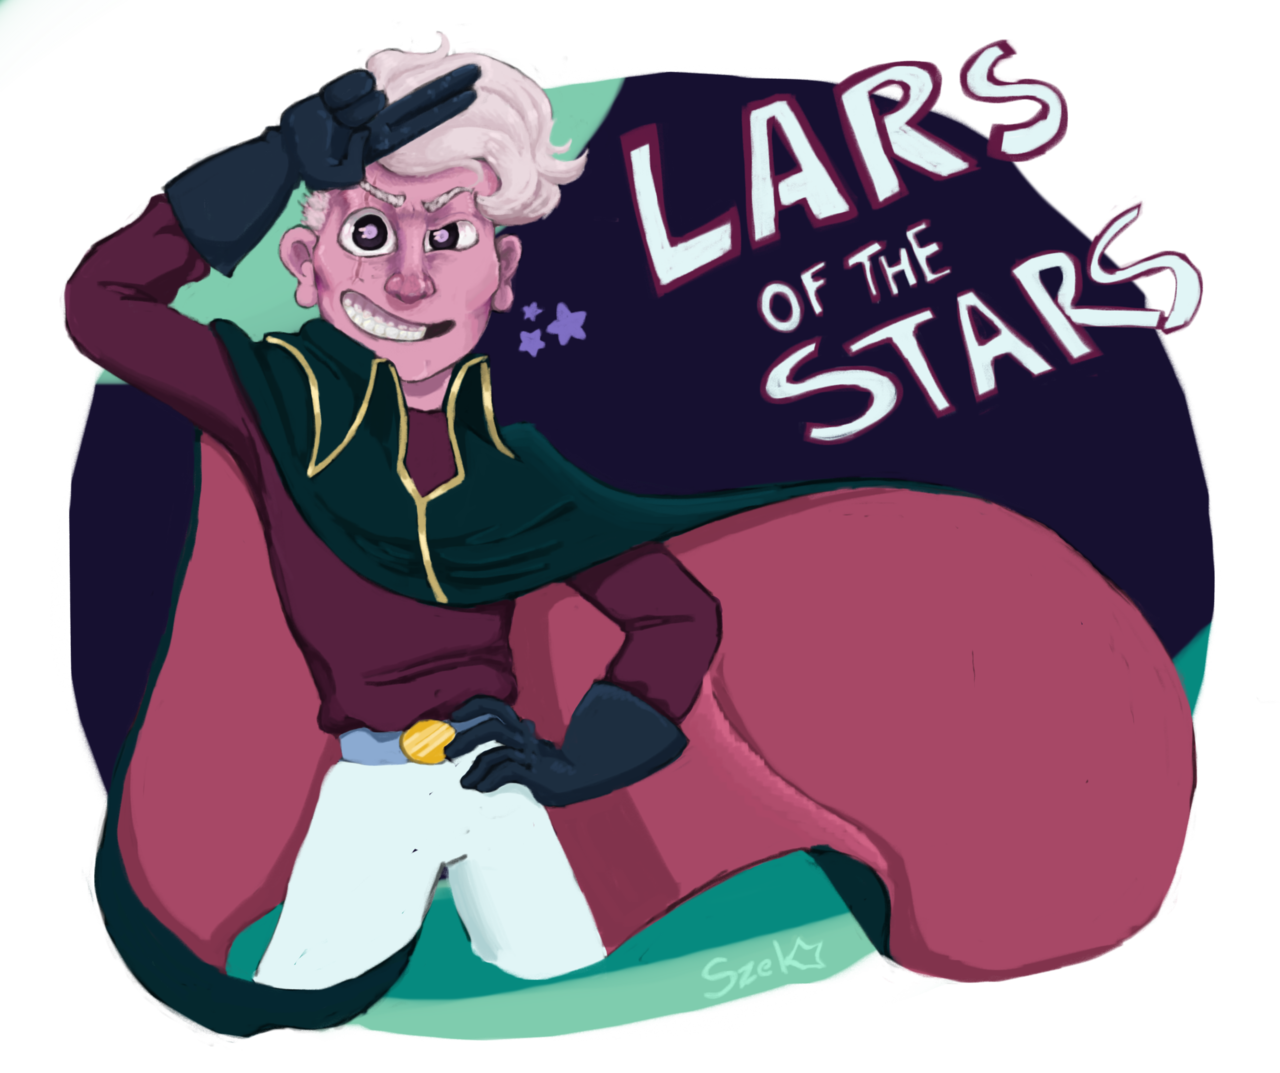 Some Lars for the today’s hype